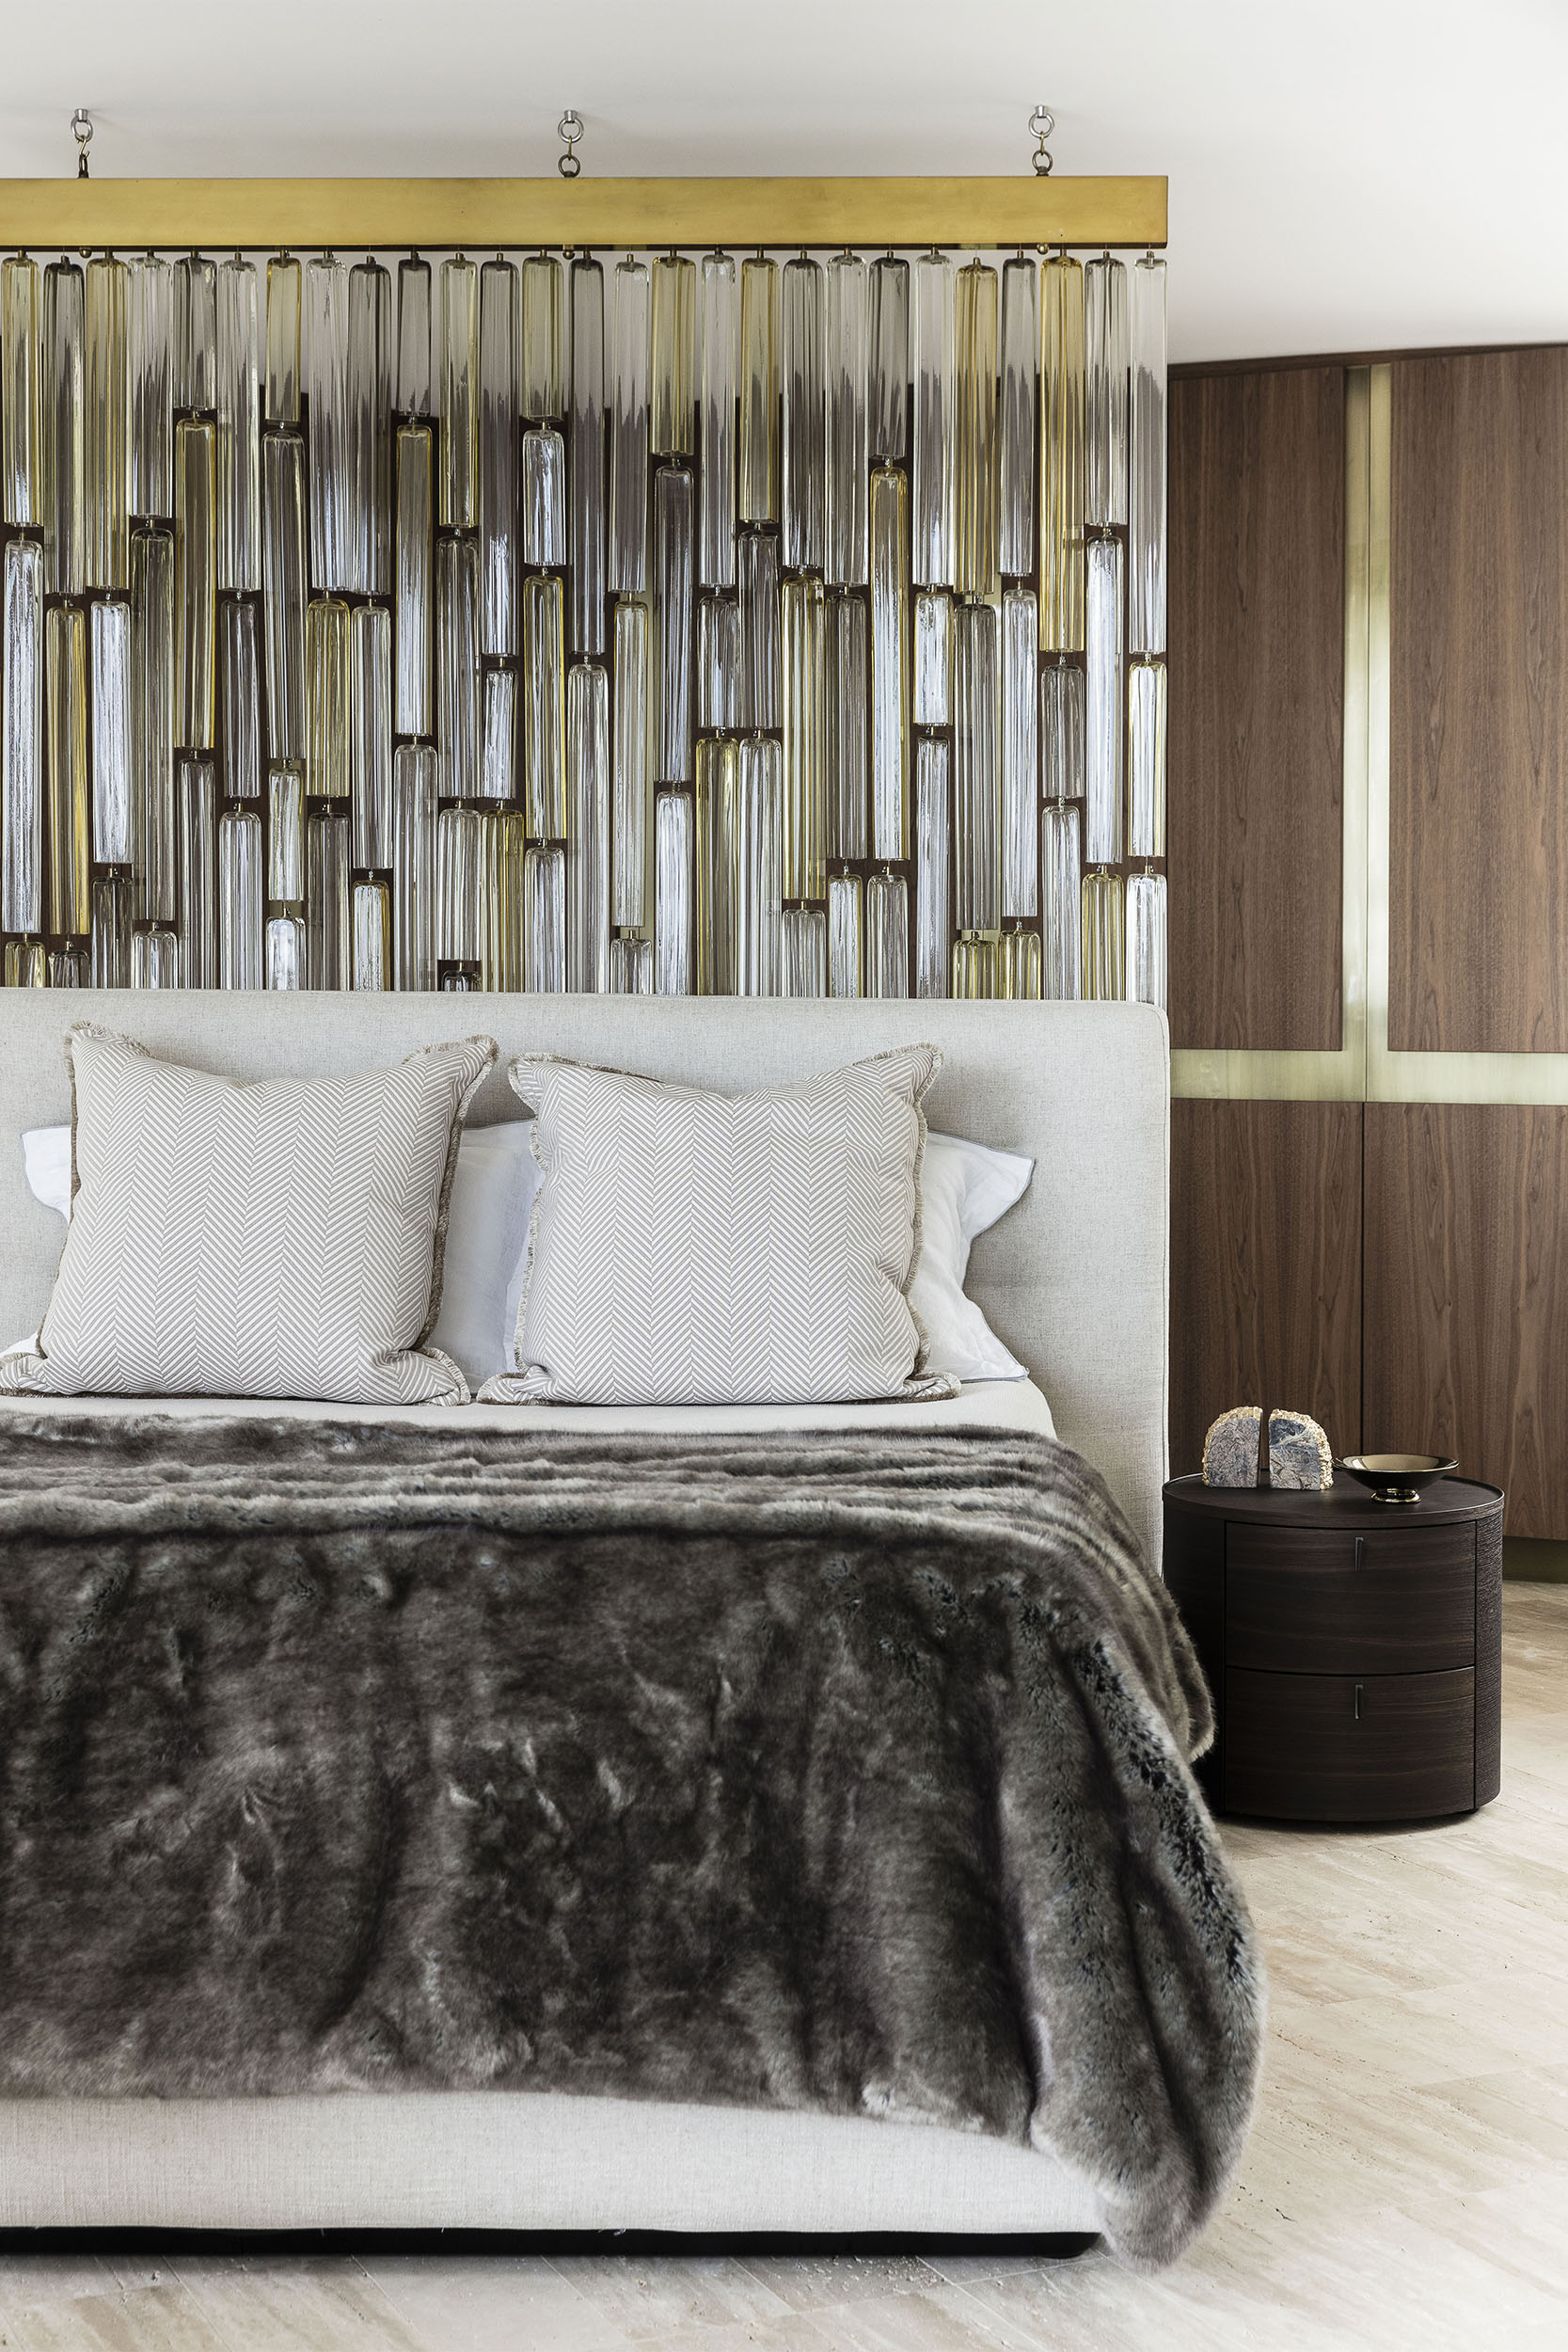 Bedroom design with 1stdibs Venini Murano glass screen and timber wardrobe by Sydney interior designers, Brendan Wong Design